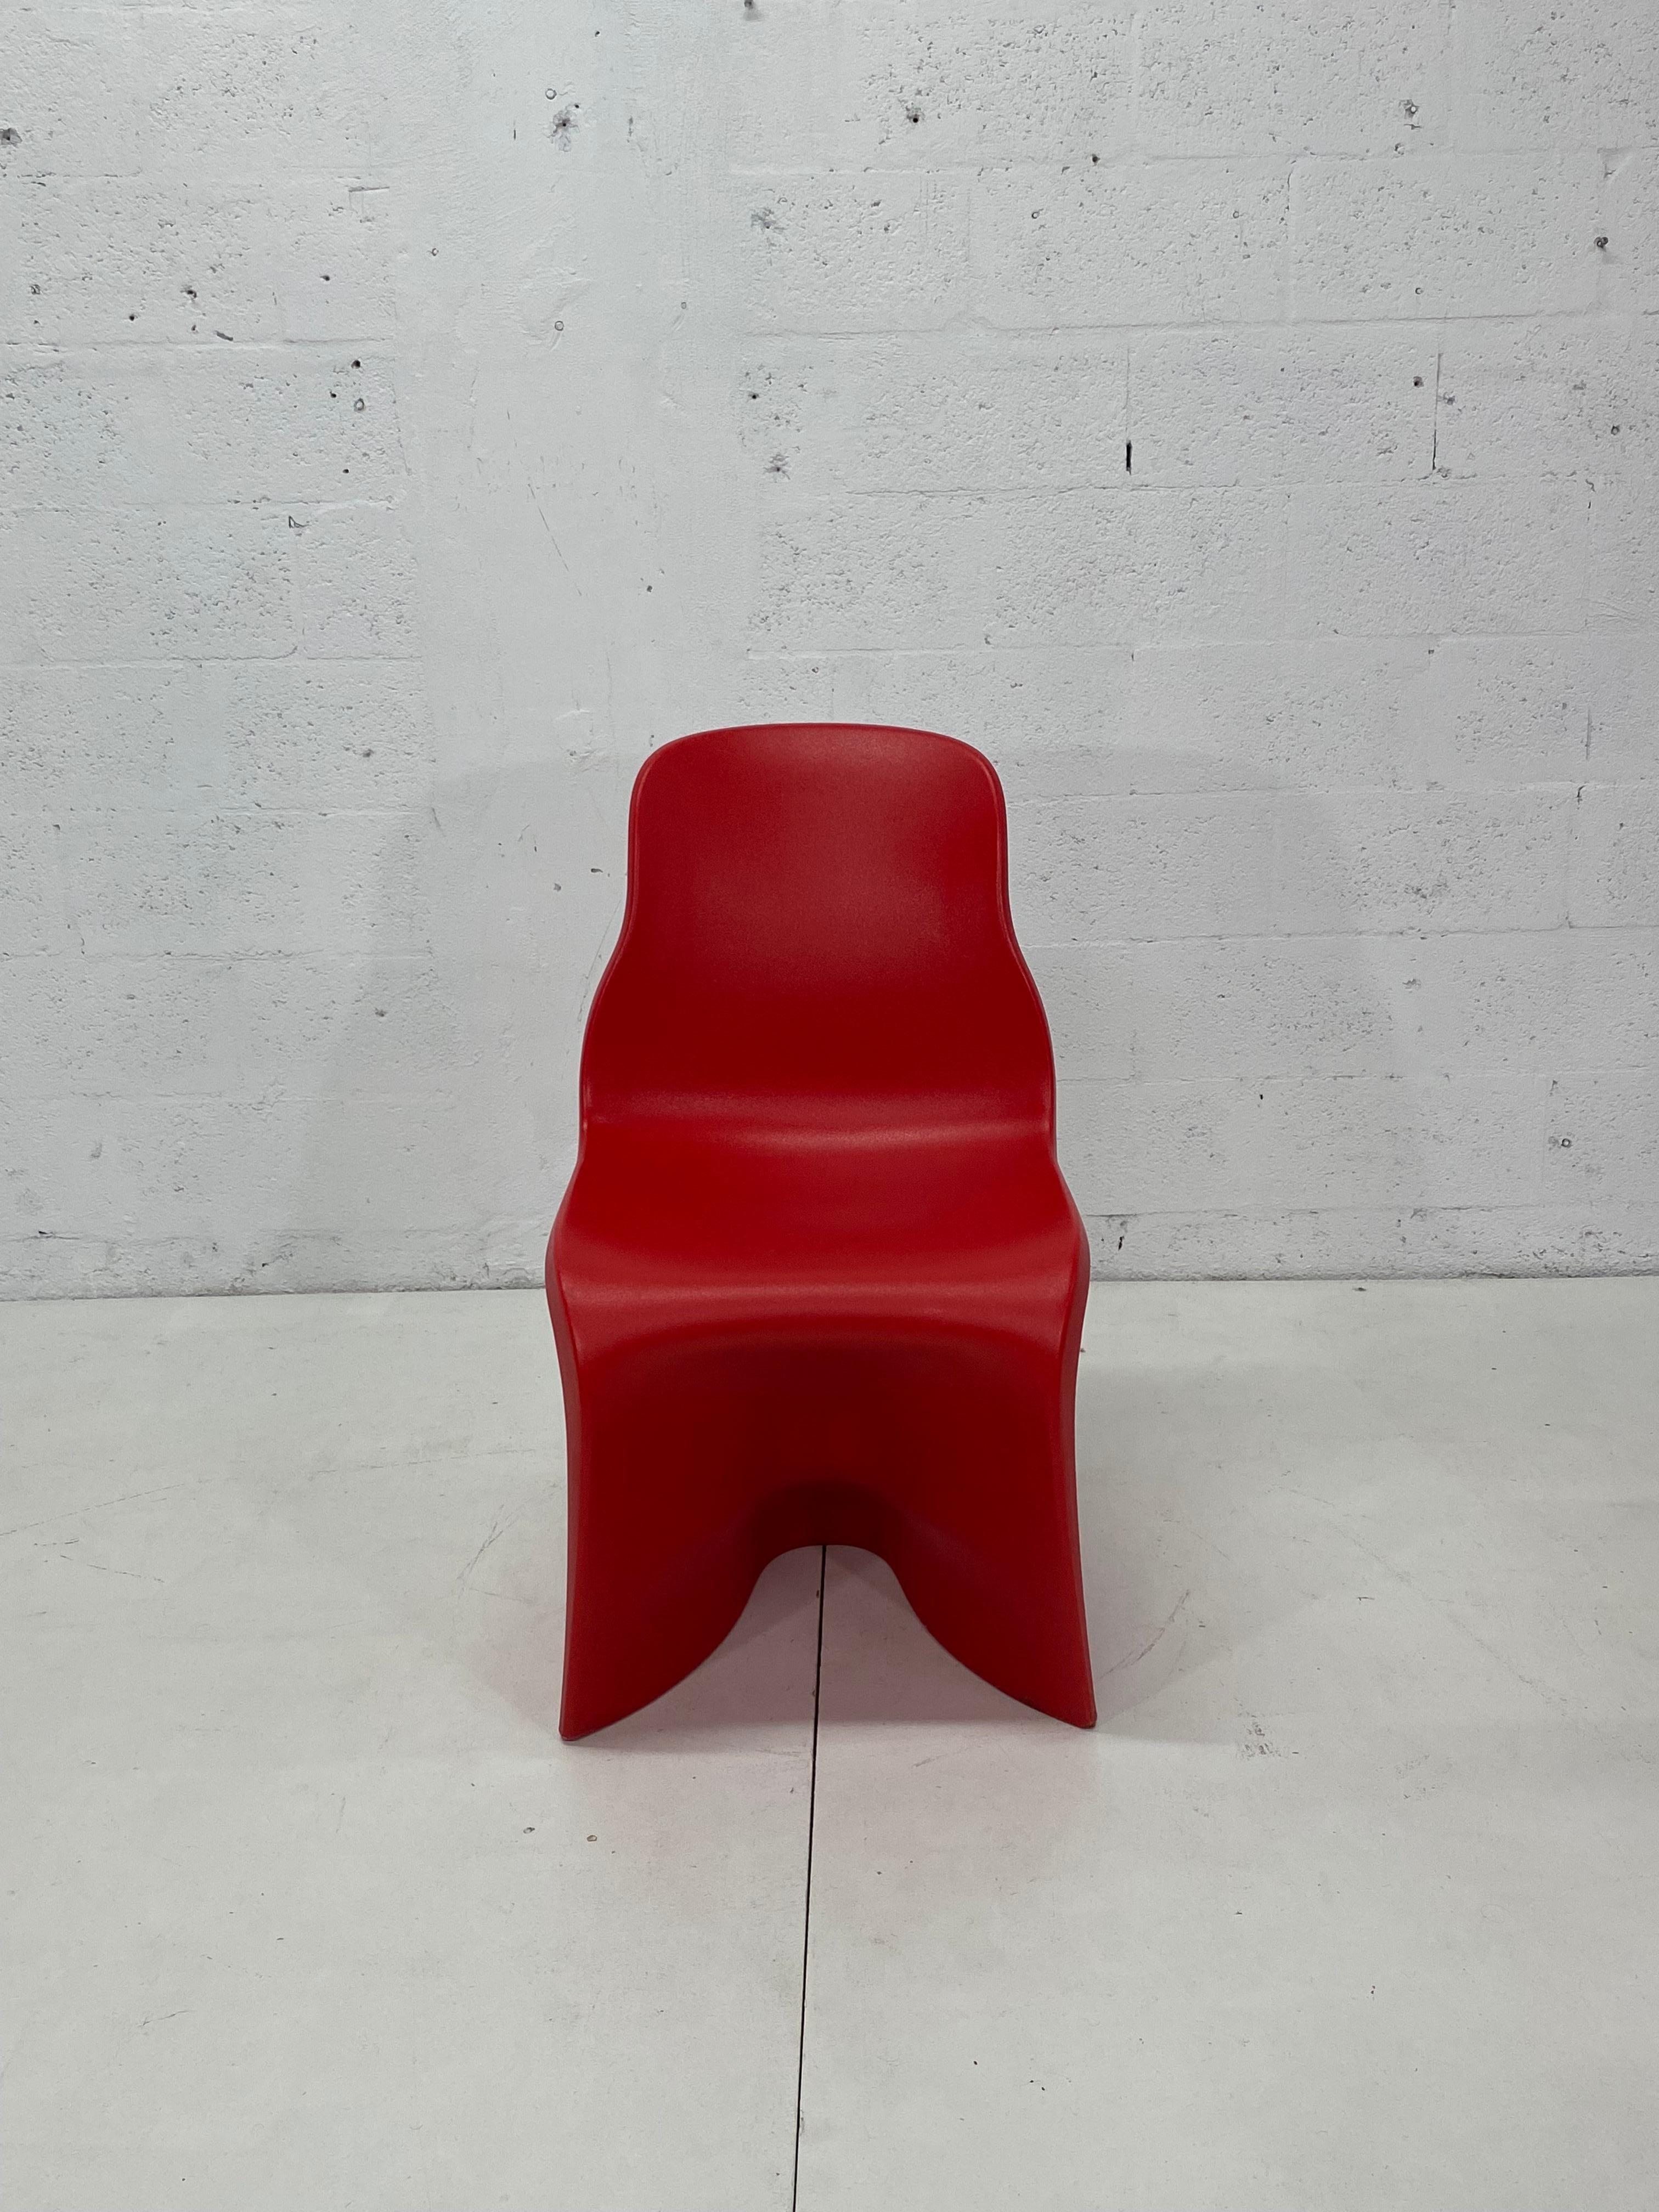 Set of four Her chairs in matte red by Fabio Novembre.

Provocative, playful and sensual, the silhouette of these chairs was created using a three-dimensional scan of a plaster sculpture of a female body. Part of the duo Him & Her chairs designed